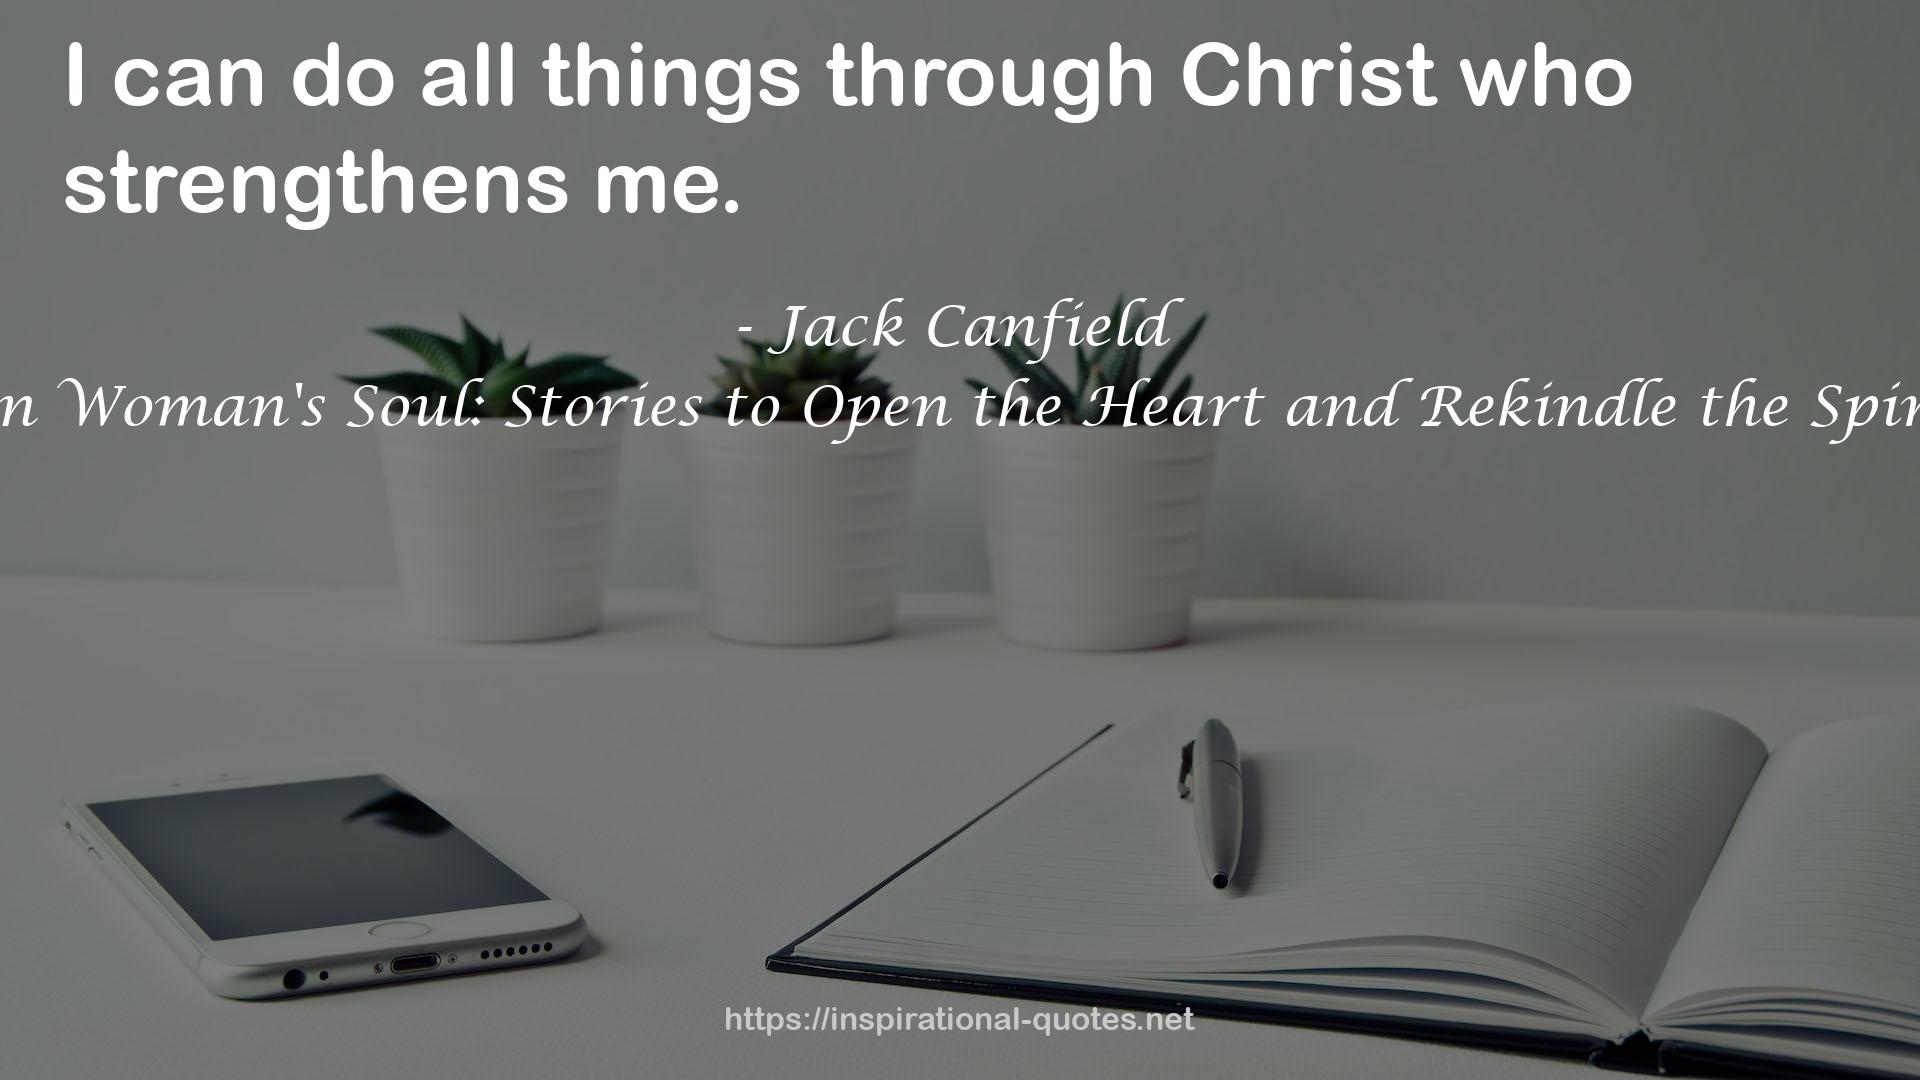 Chicken Soup for the Christian Woman's Soul: Stories to Open the Heart and Rekindle the Spirit (Chicken Soup for the Soul) QUOTES